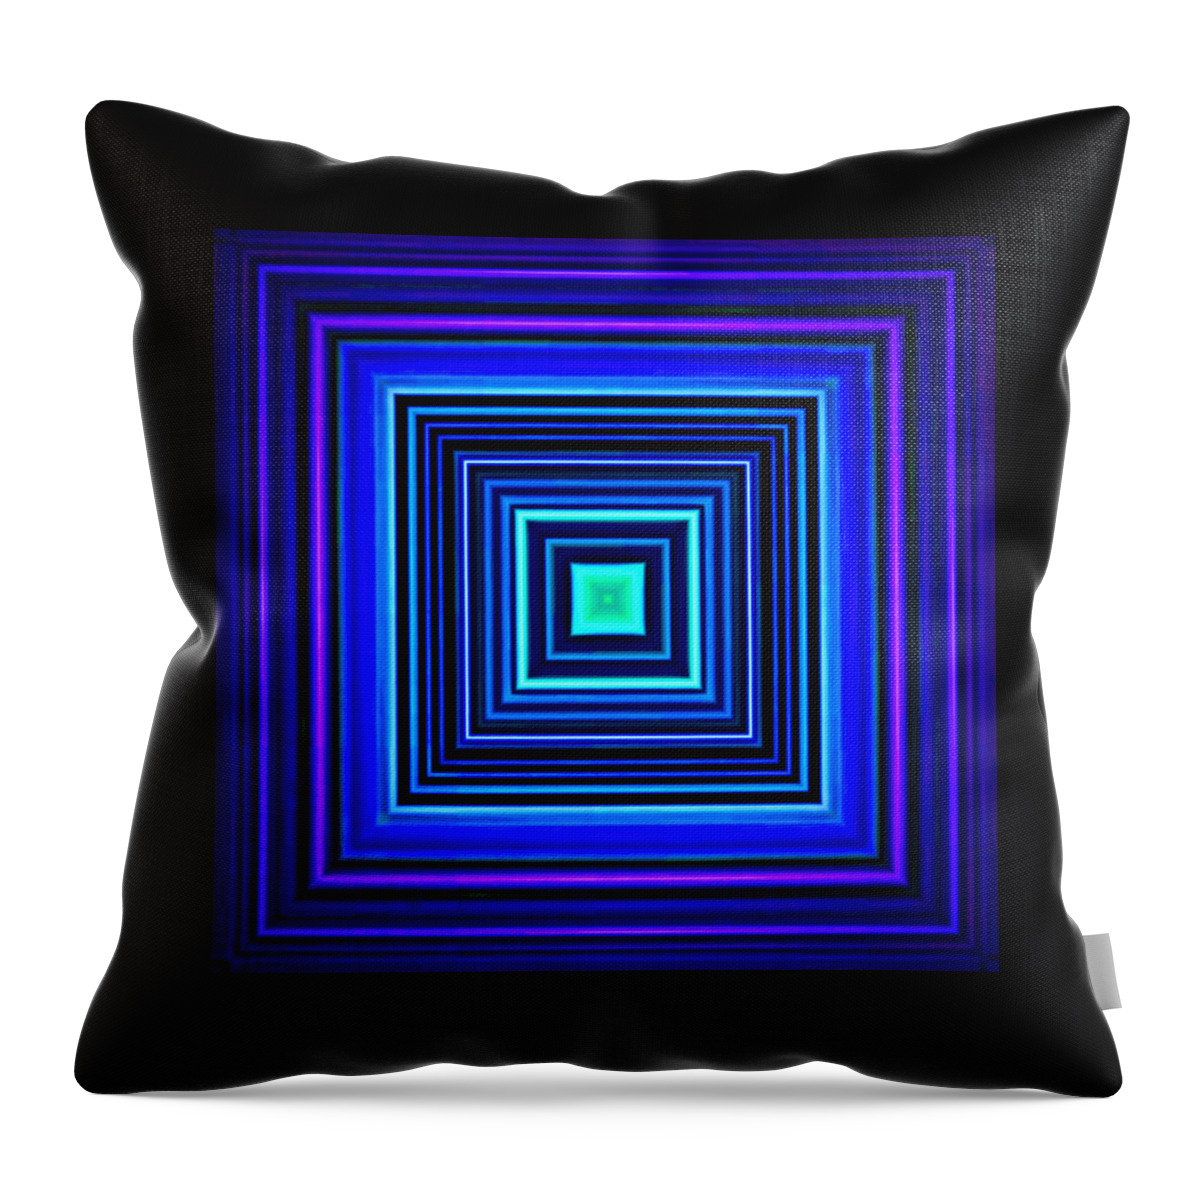 Living Room Throw Pillow featuring the digital art Infinity Squares by Ronald Mills